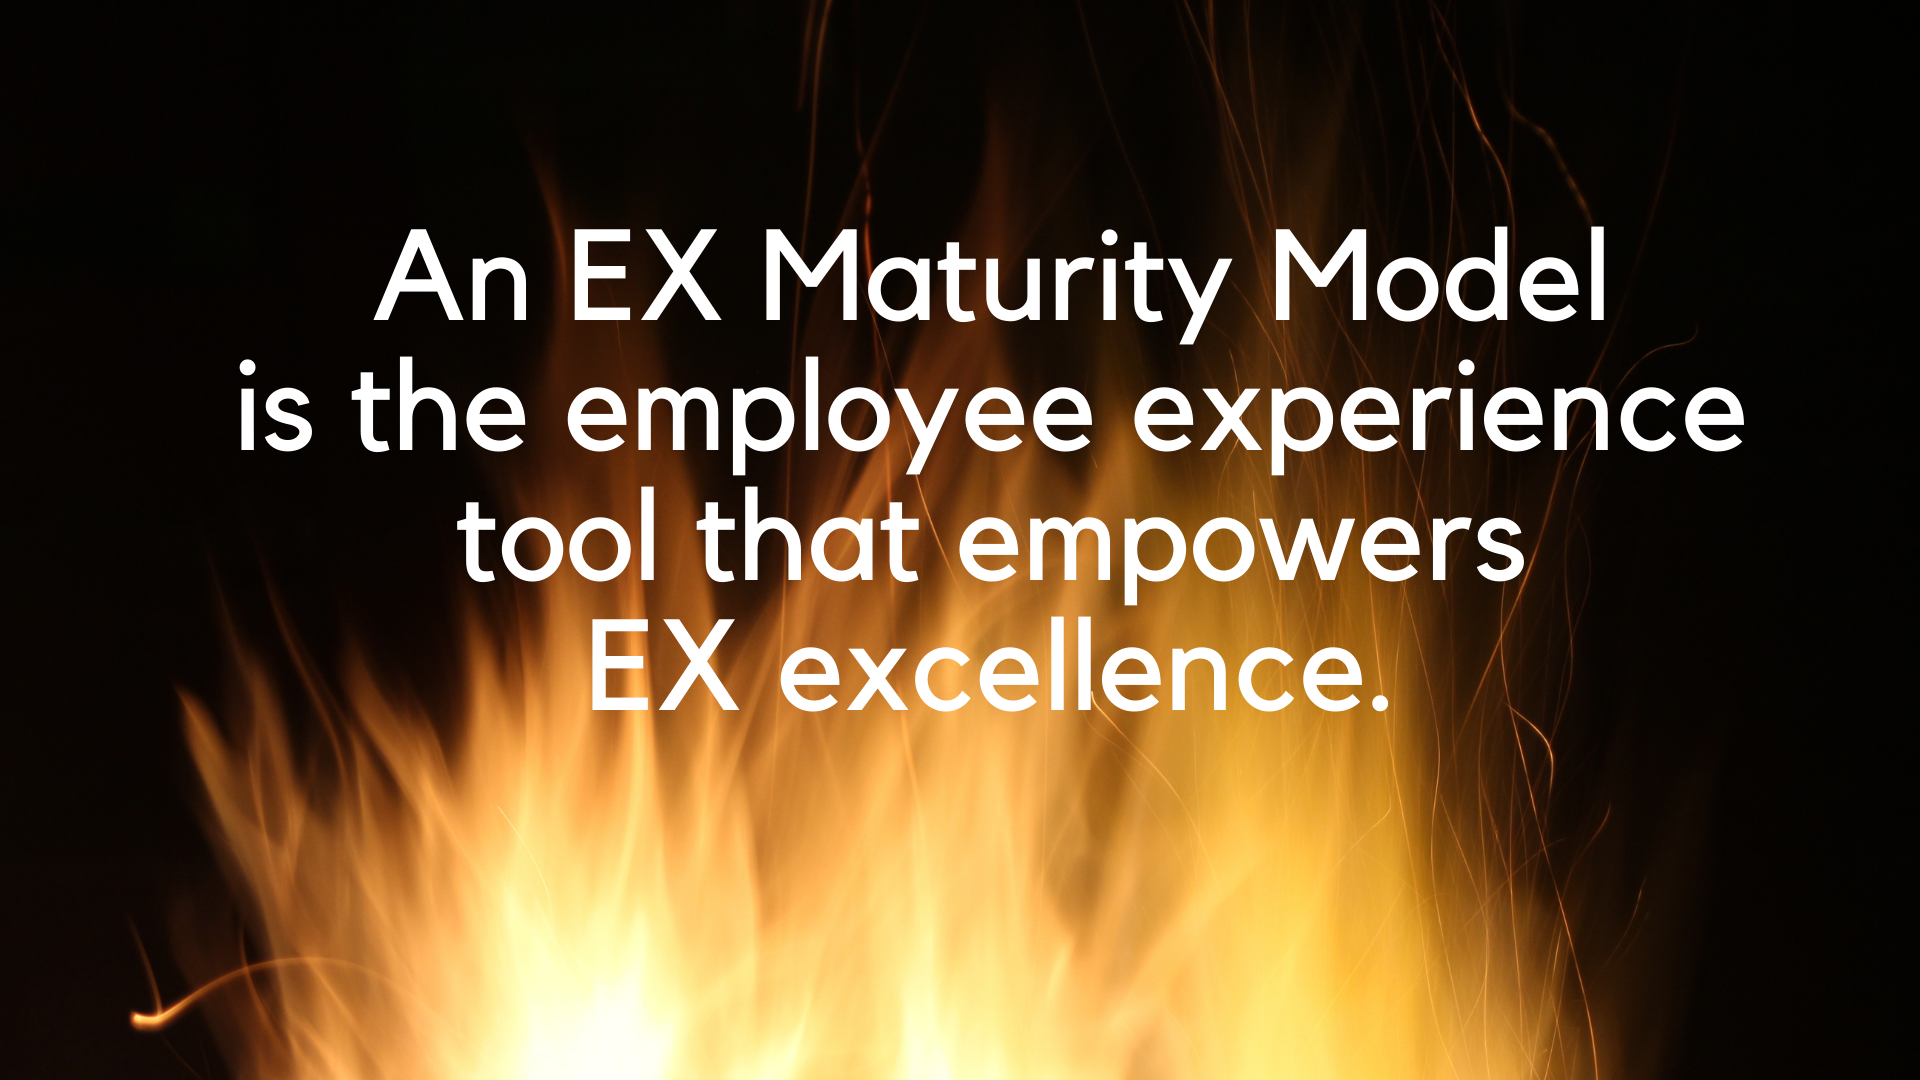 Use An EX Maturity Model To Empower EX Excellence